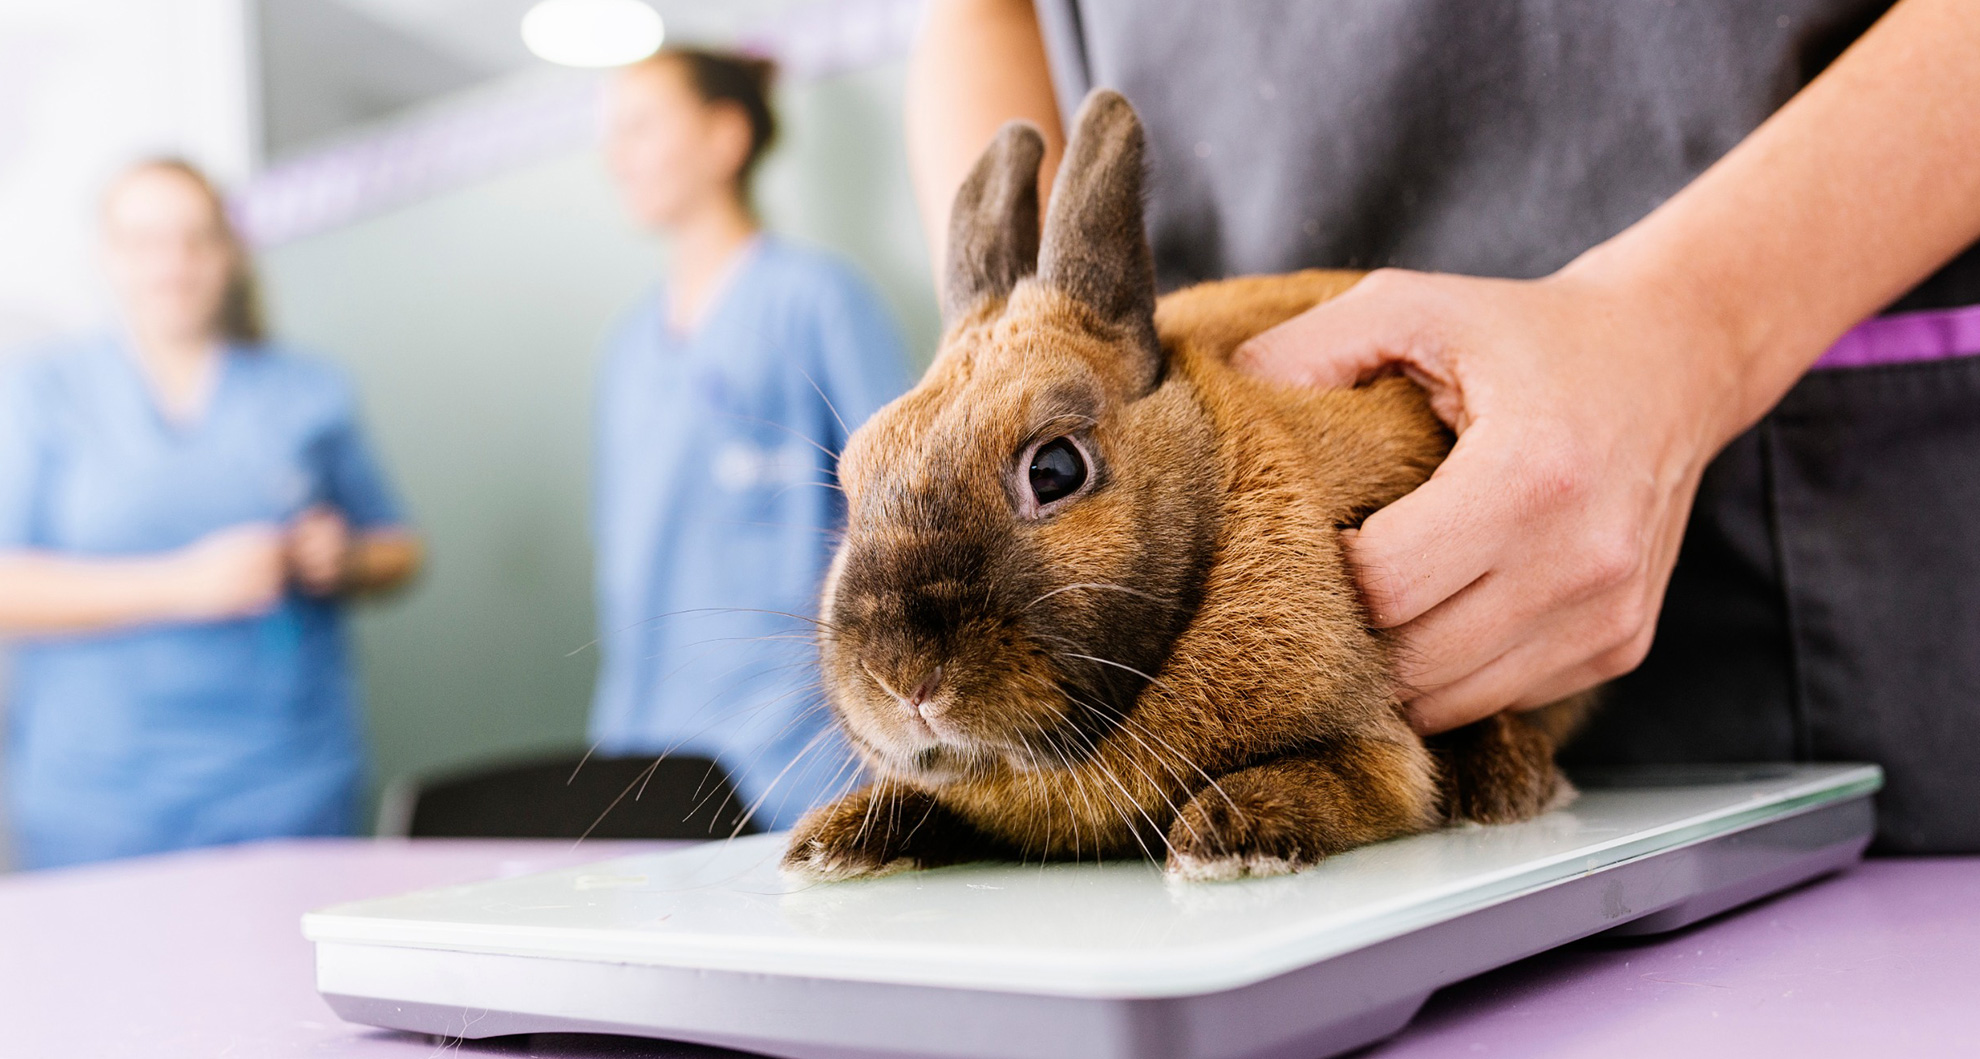 Rabbit Emergencies and First Aid